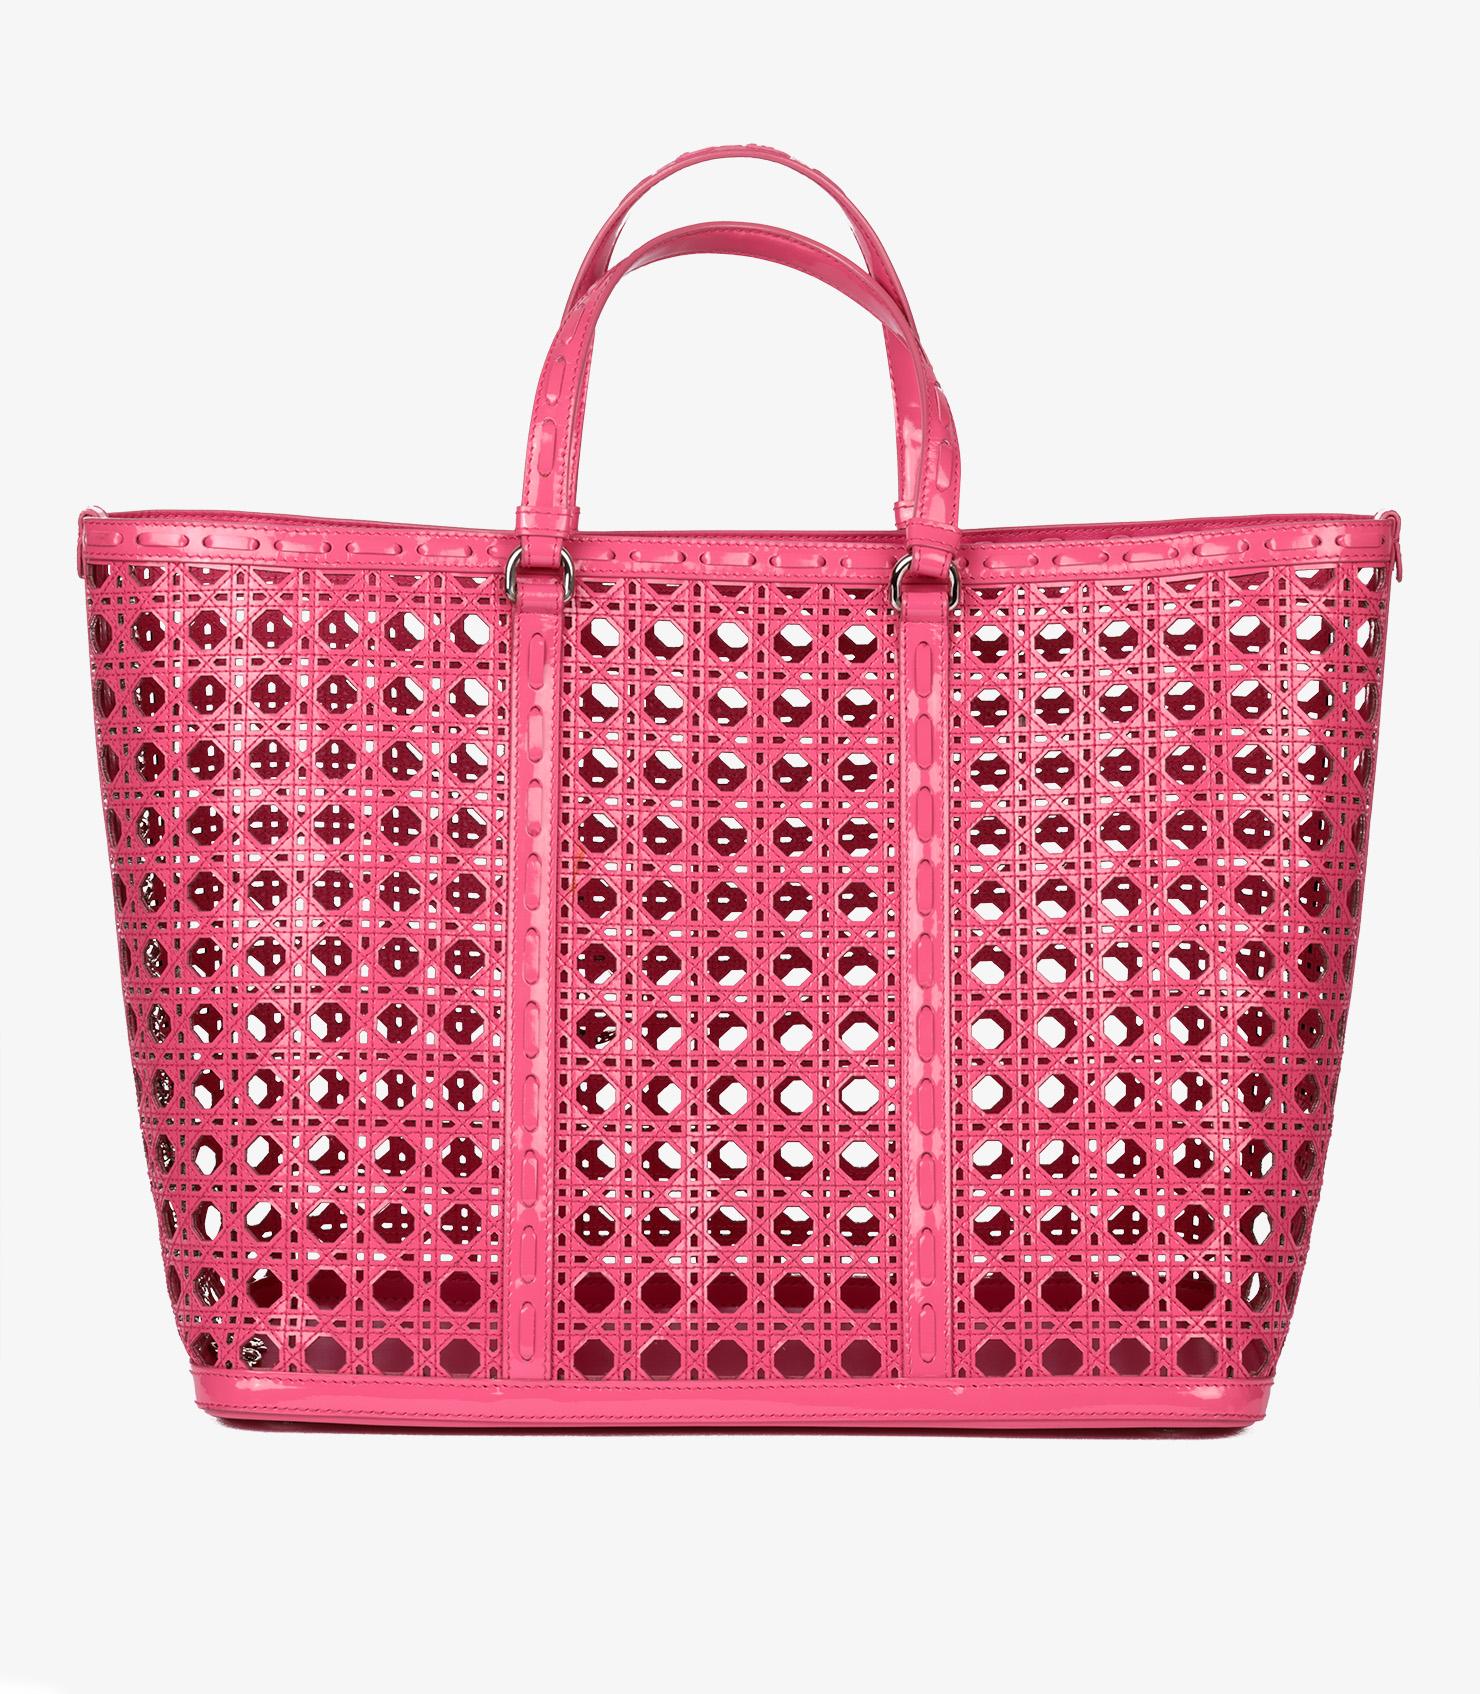 Christian Dior Pink Perforated Patent Leather Tote Bag For Sale 2